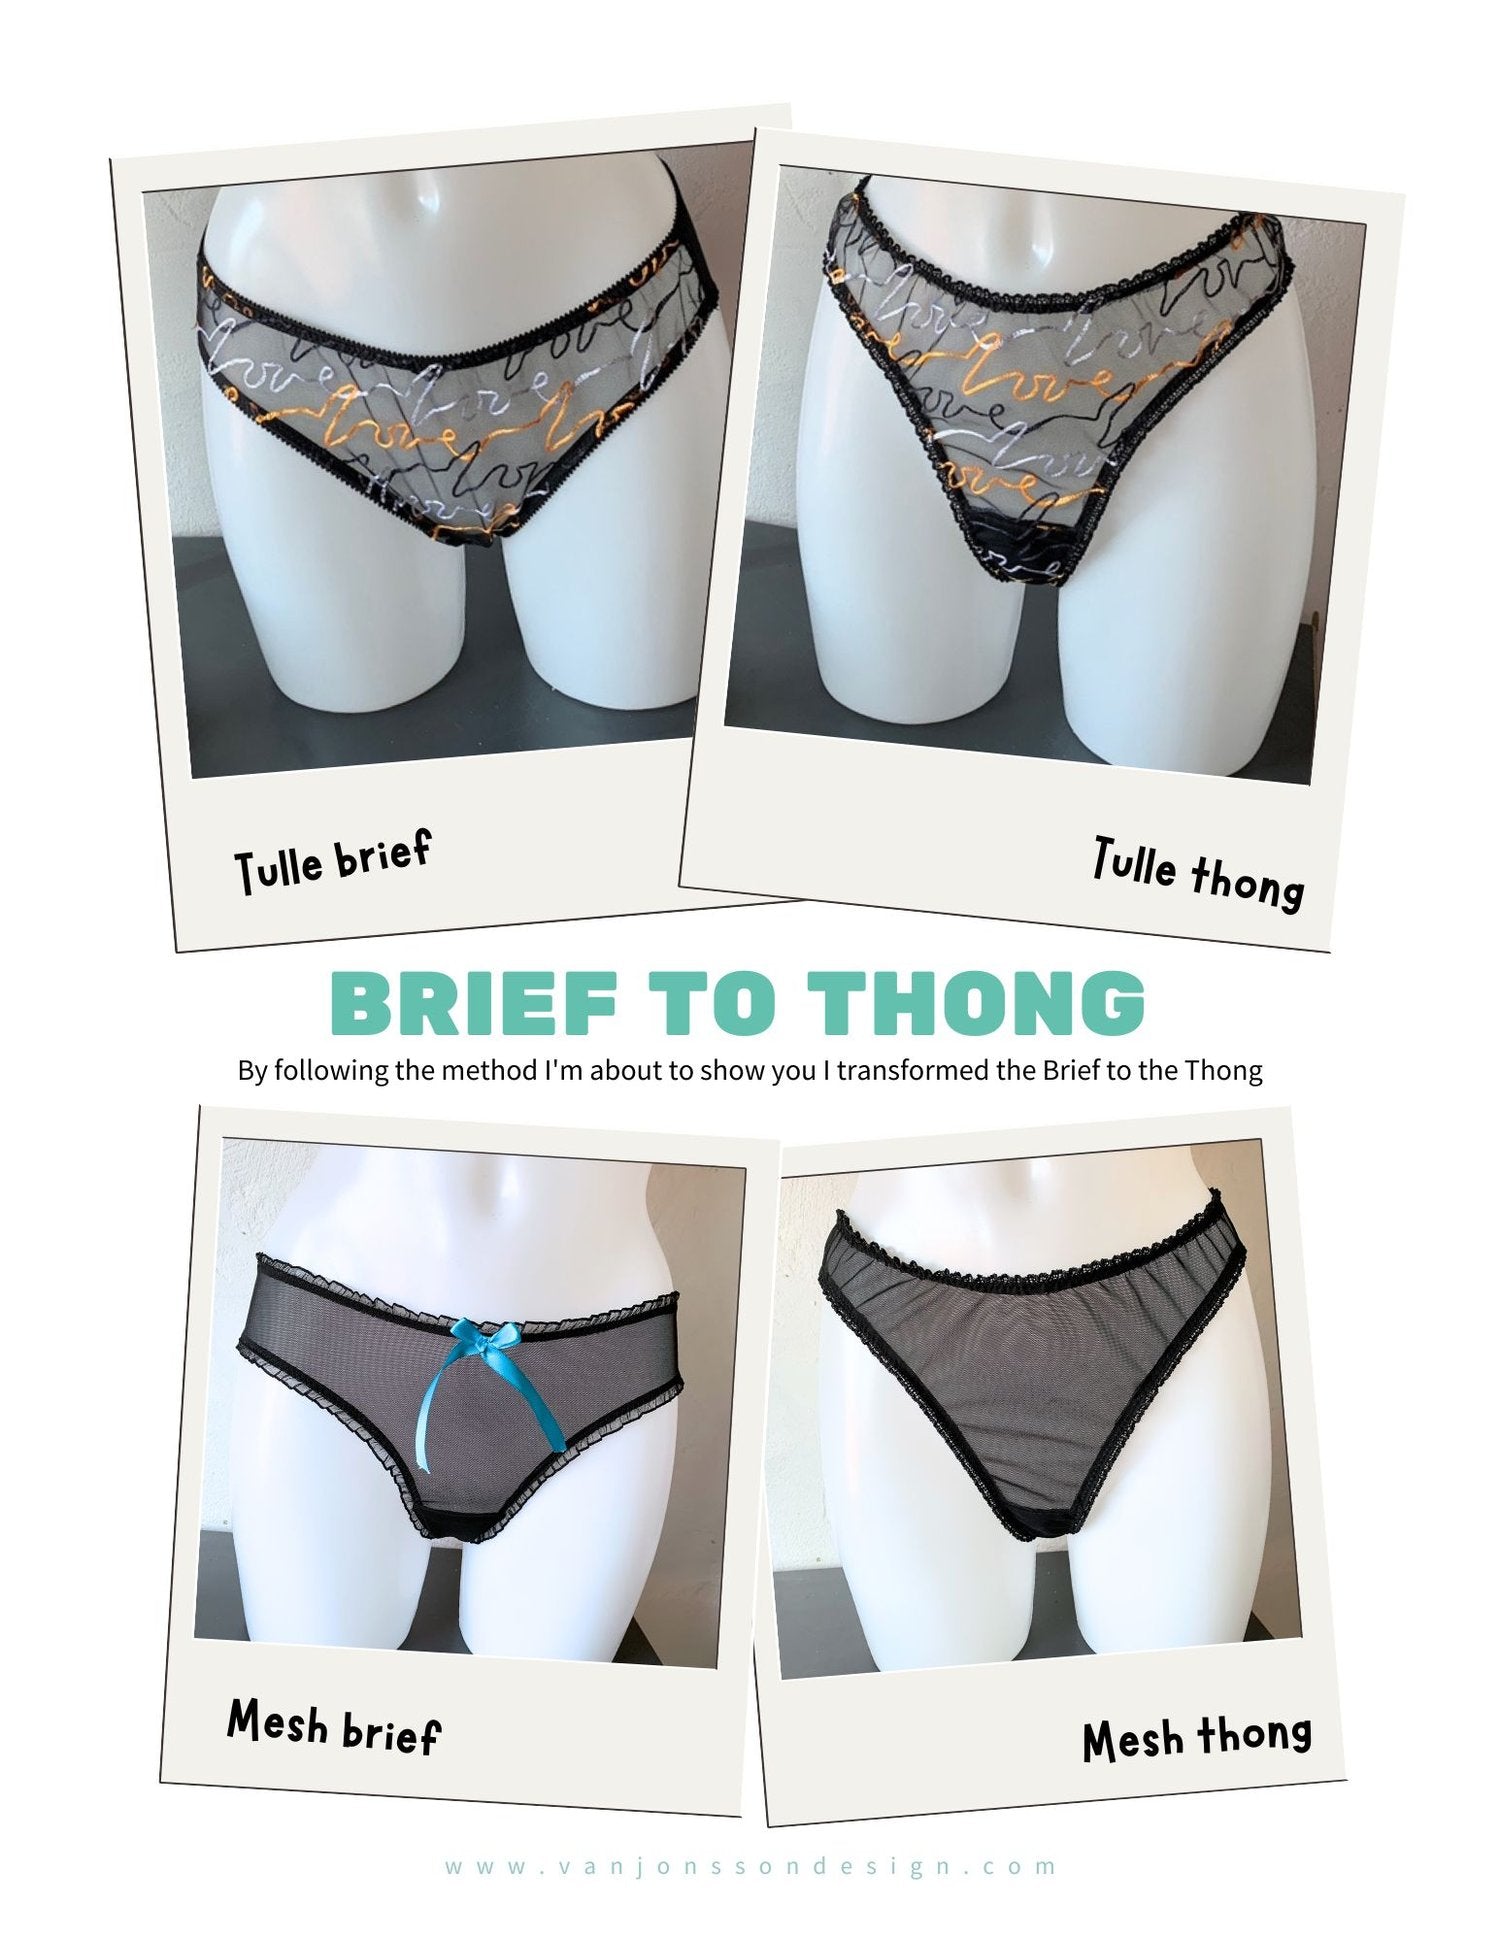 EBook: Van Jonsson Design- How to change a Brief pattern to a Thong or G-string pattern